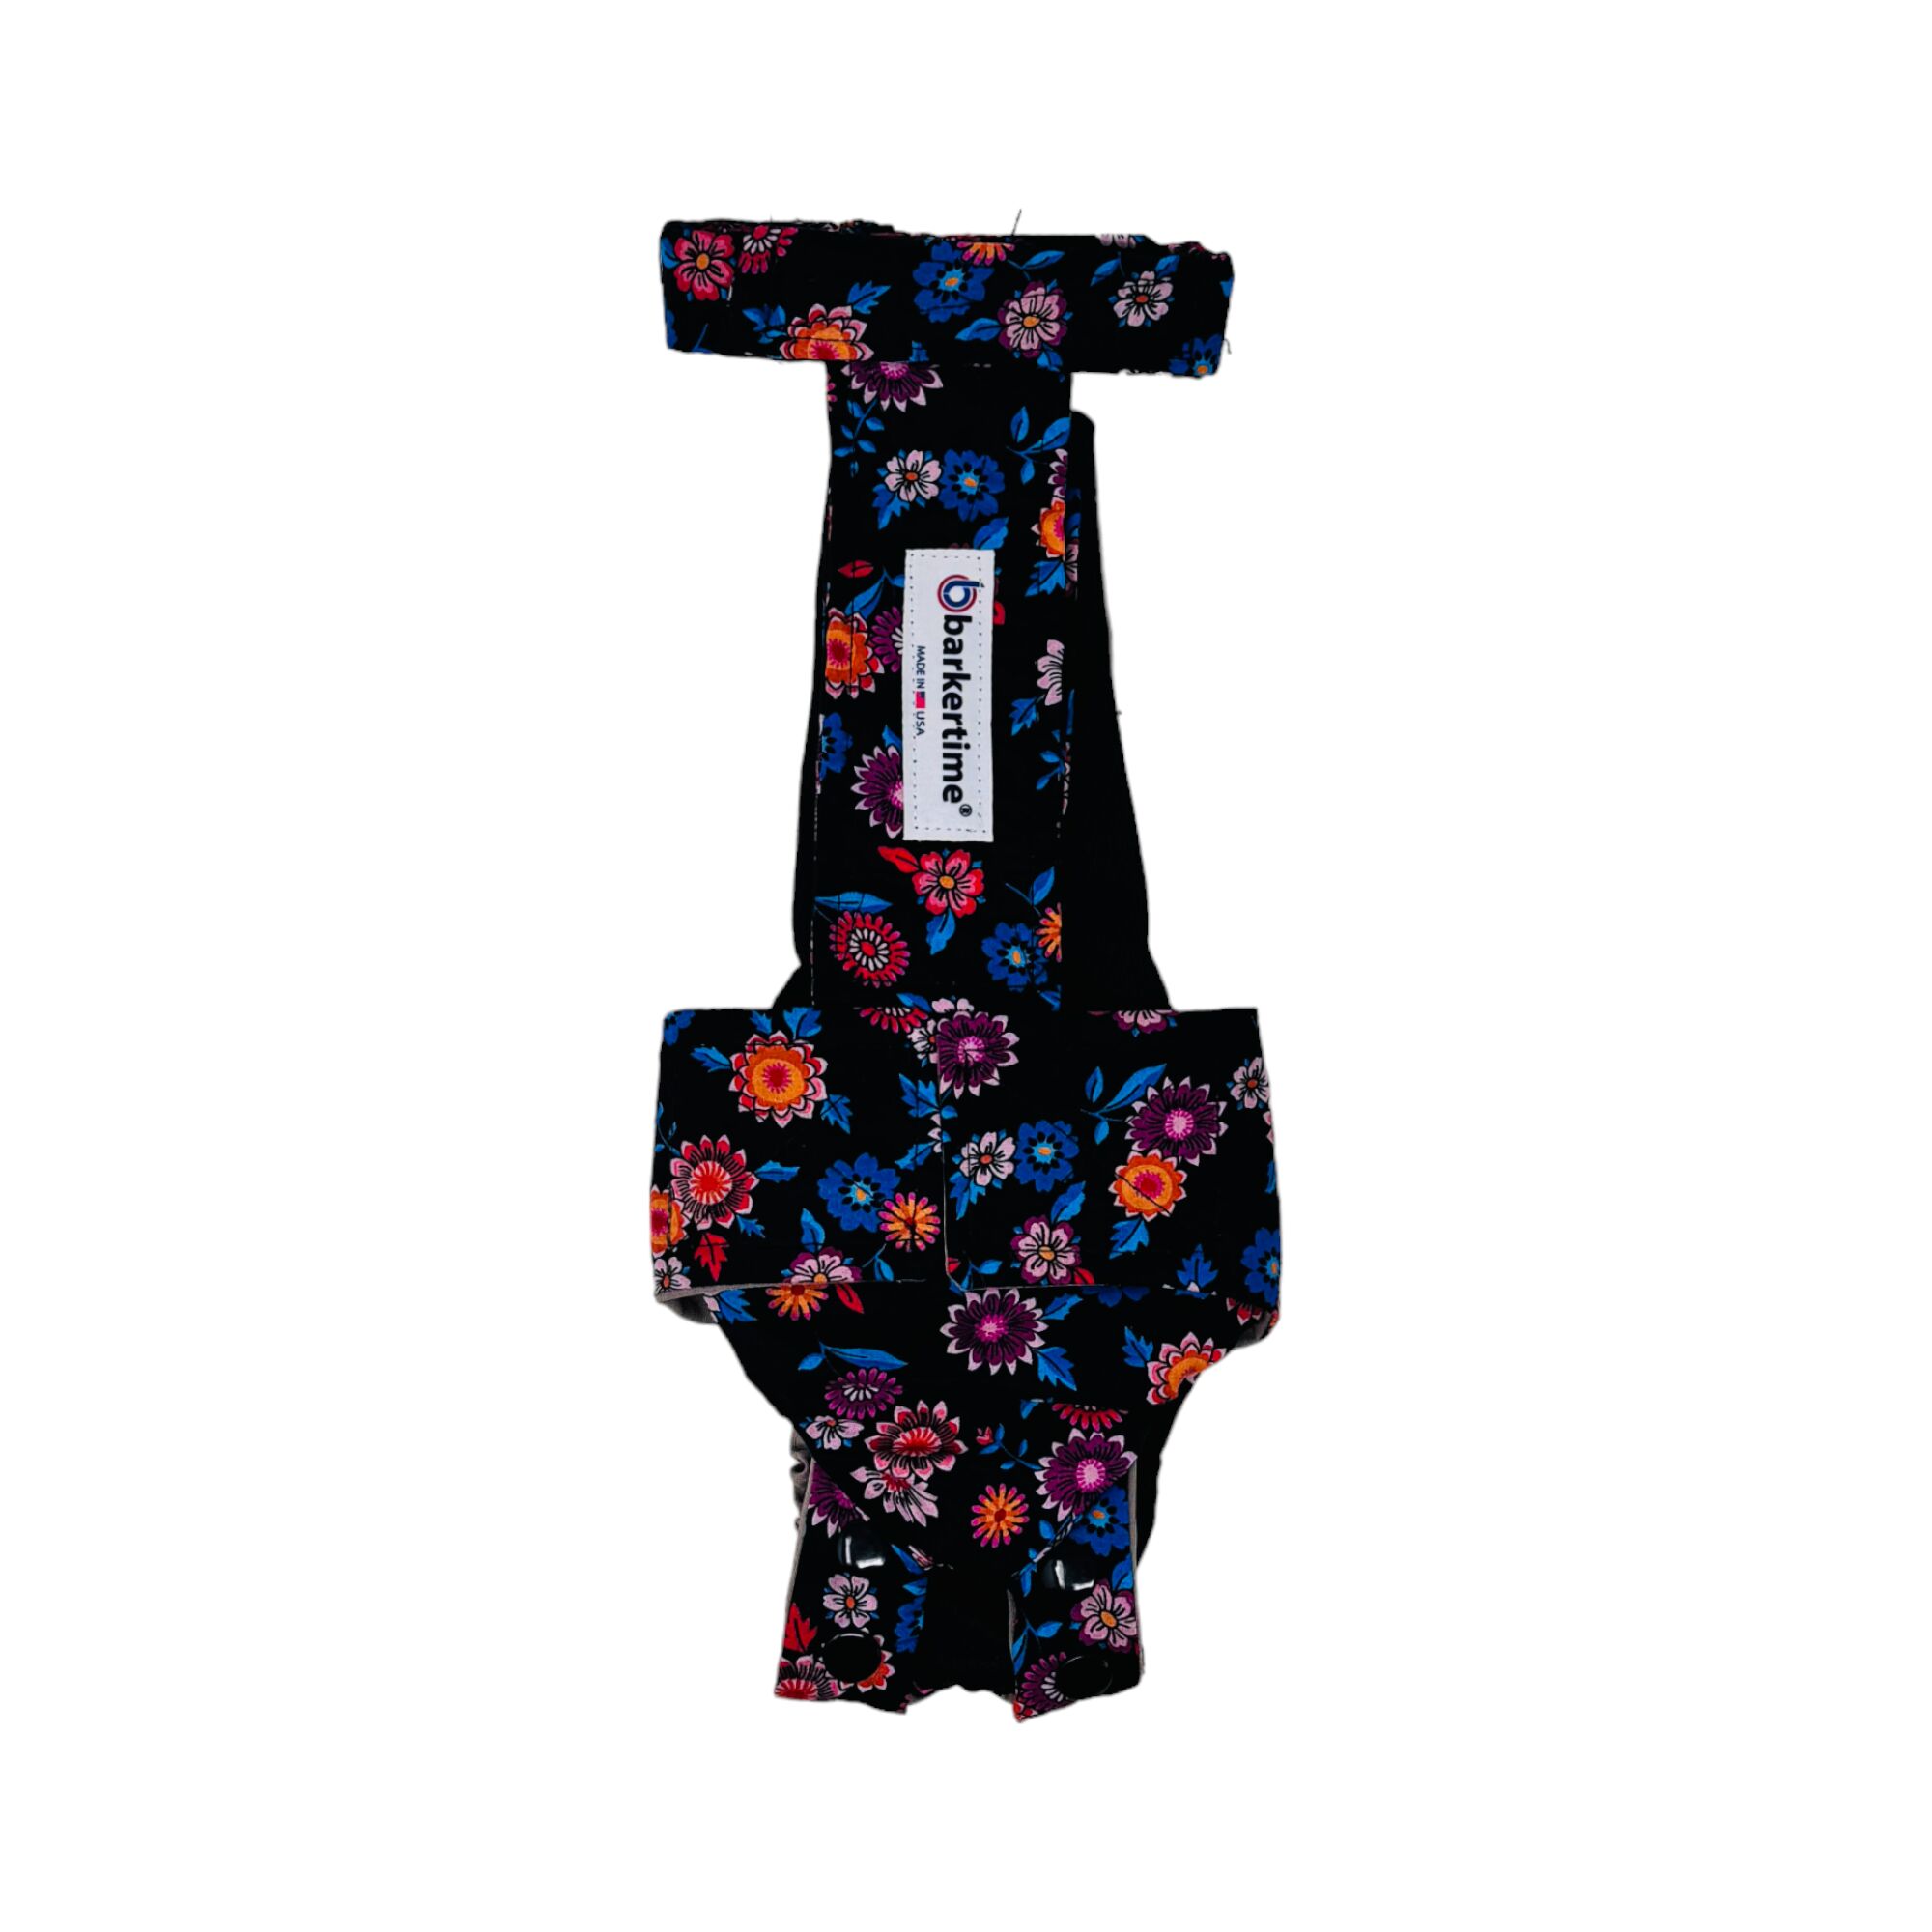 Black Spring Flower Bloom Dog Diaper Snappy Overall